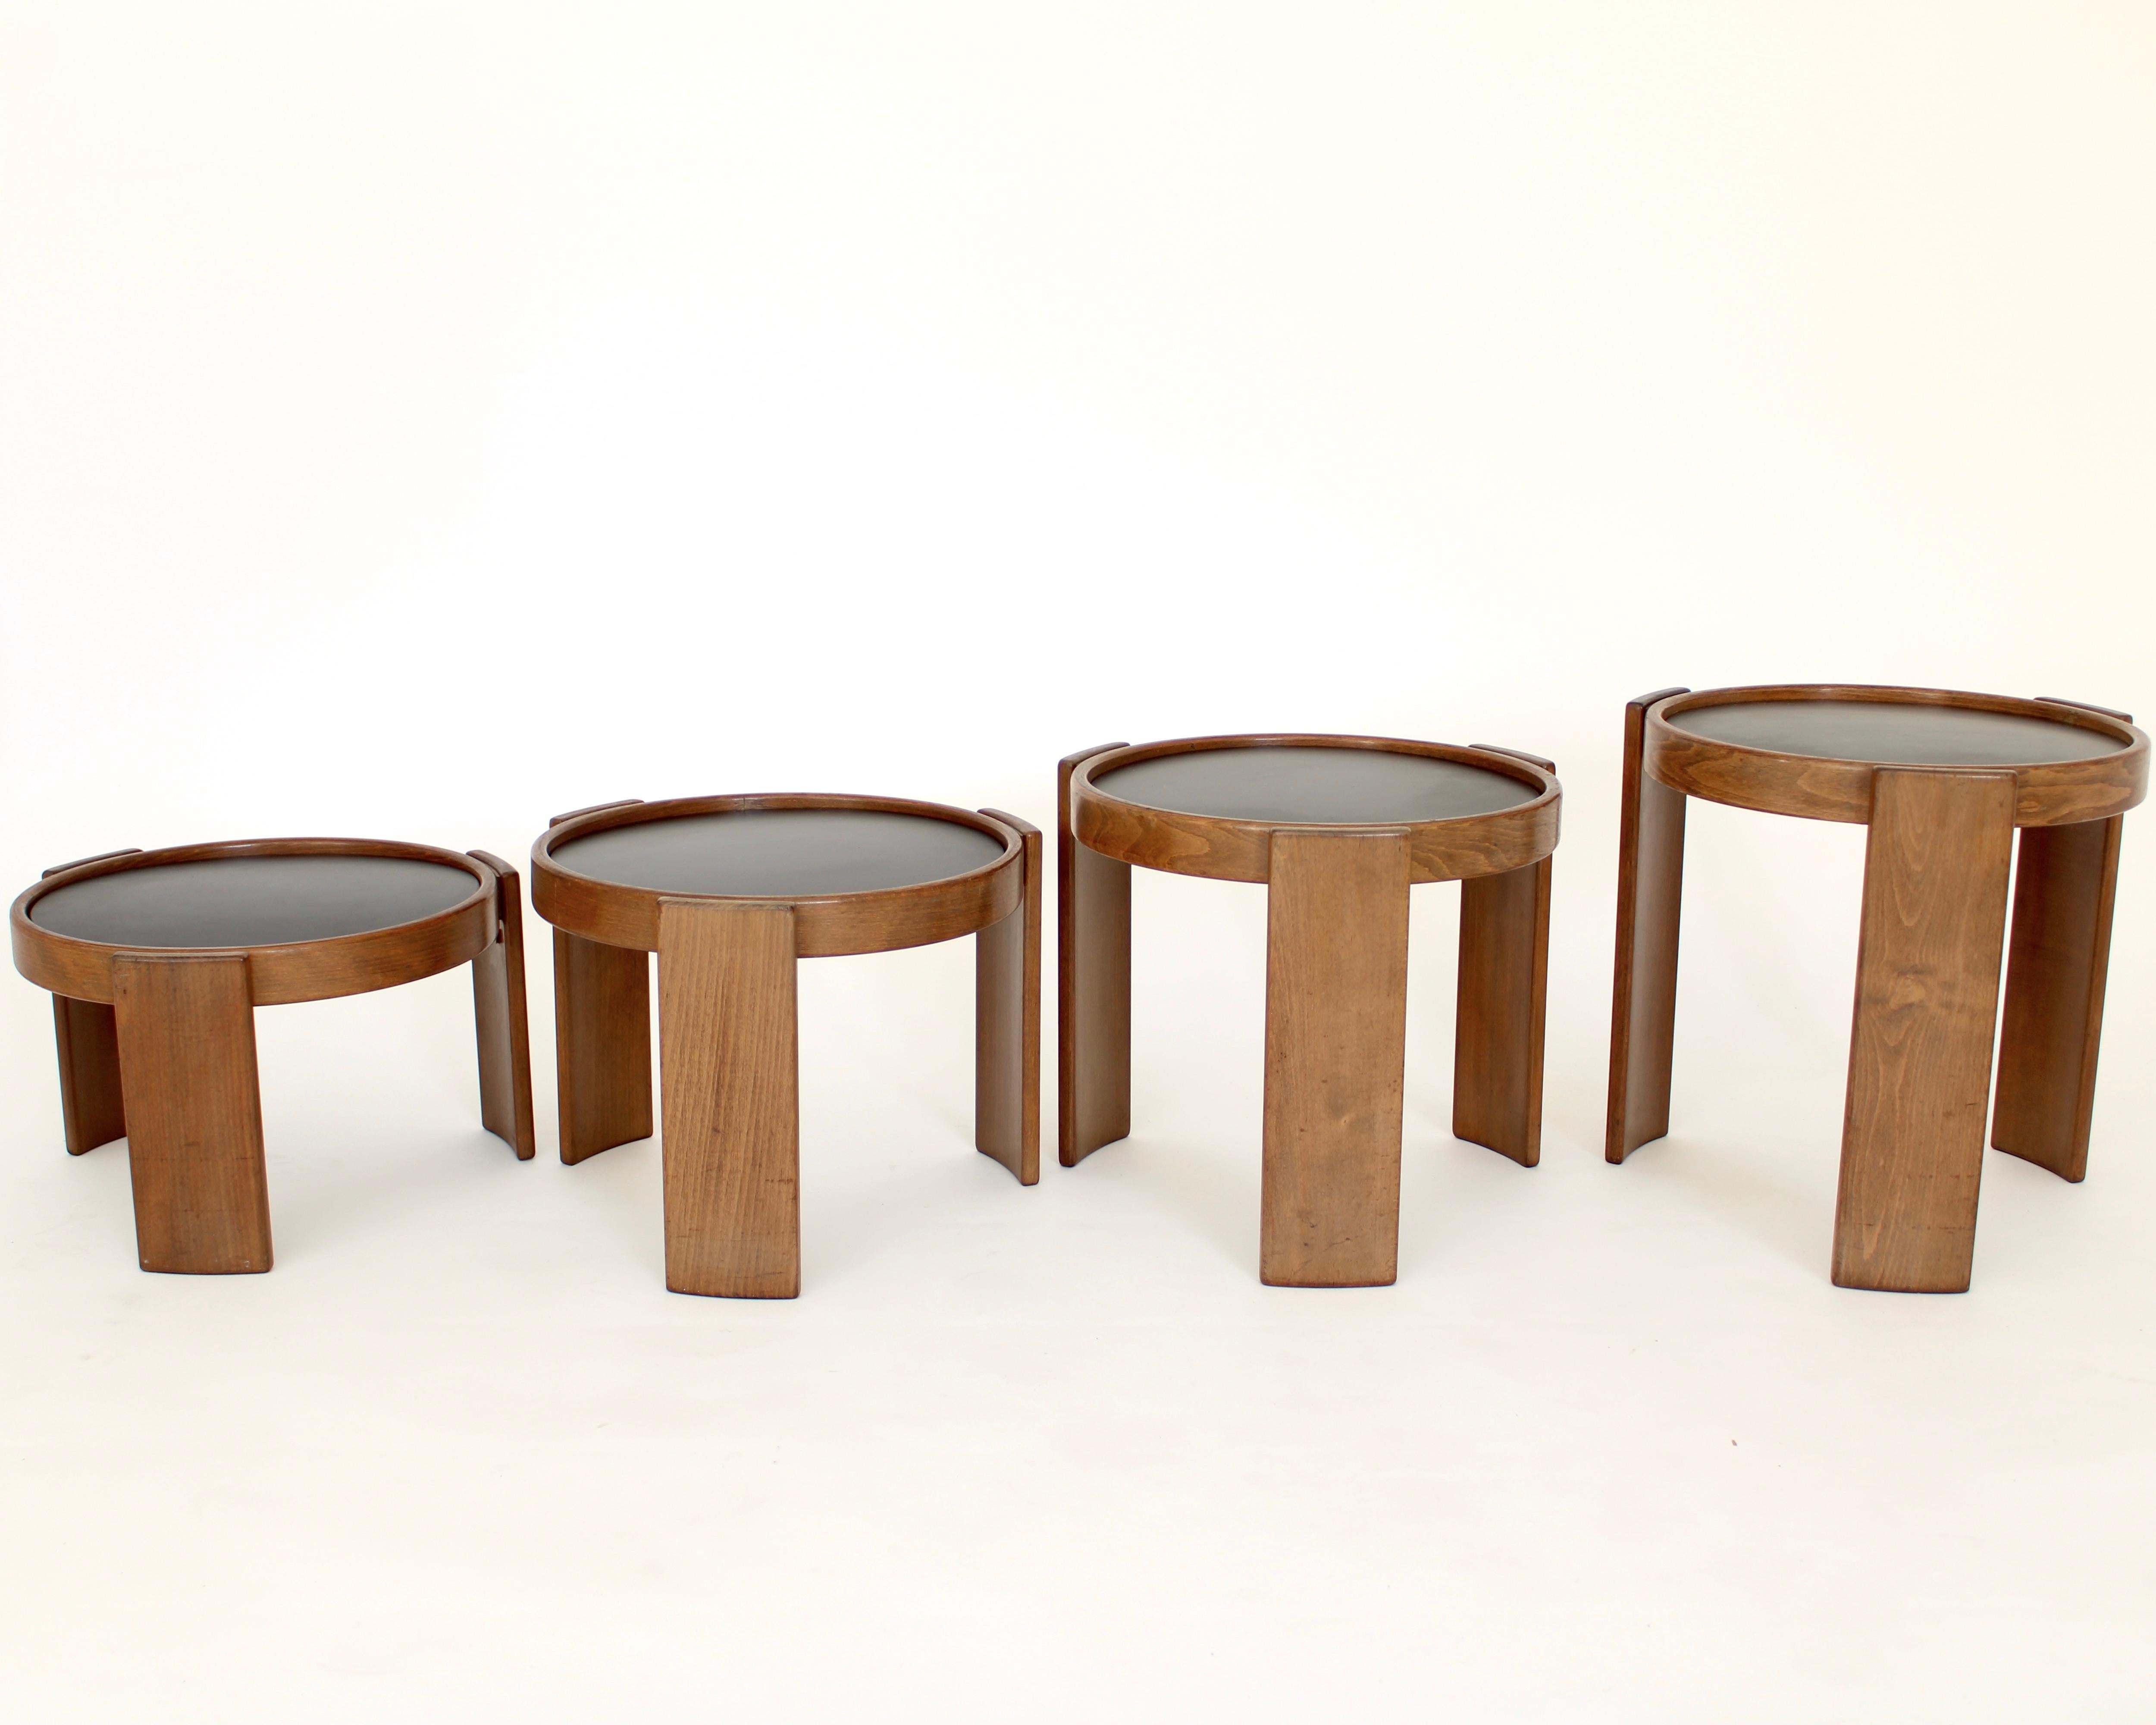 Set of four modular stacking or nesting tables, 